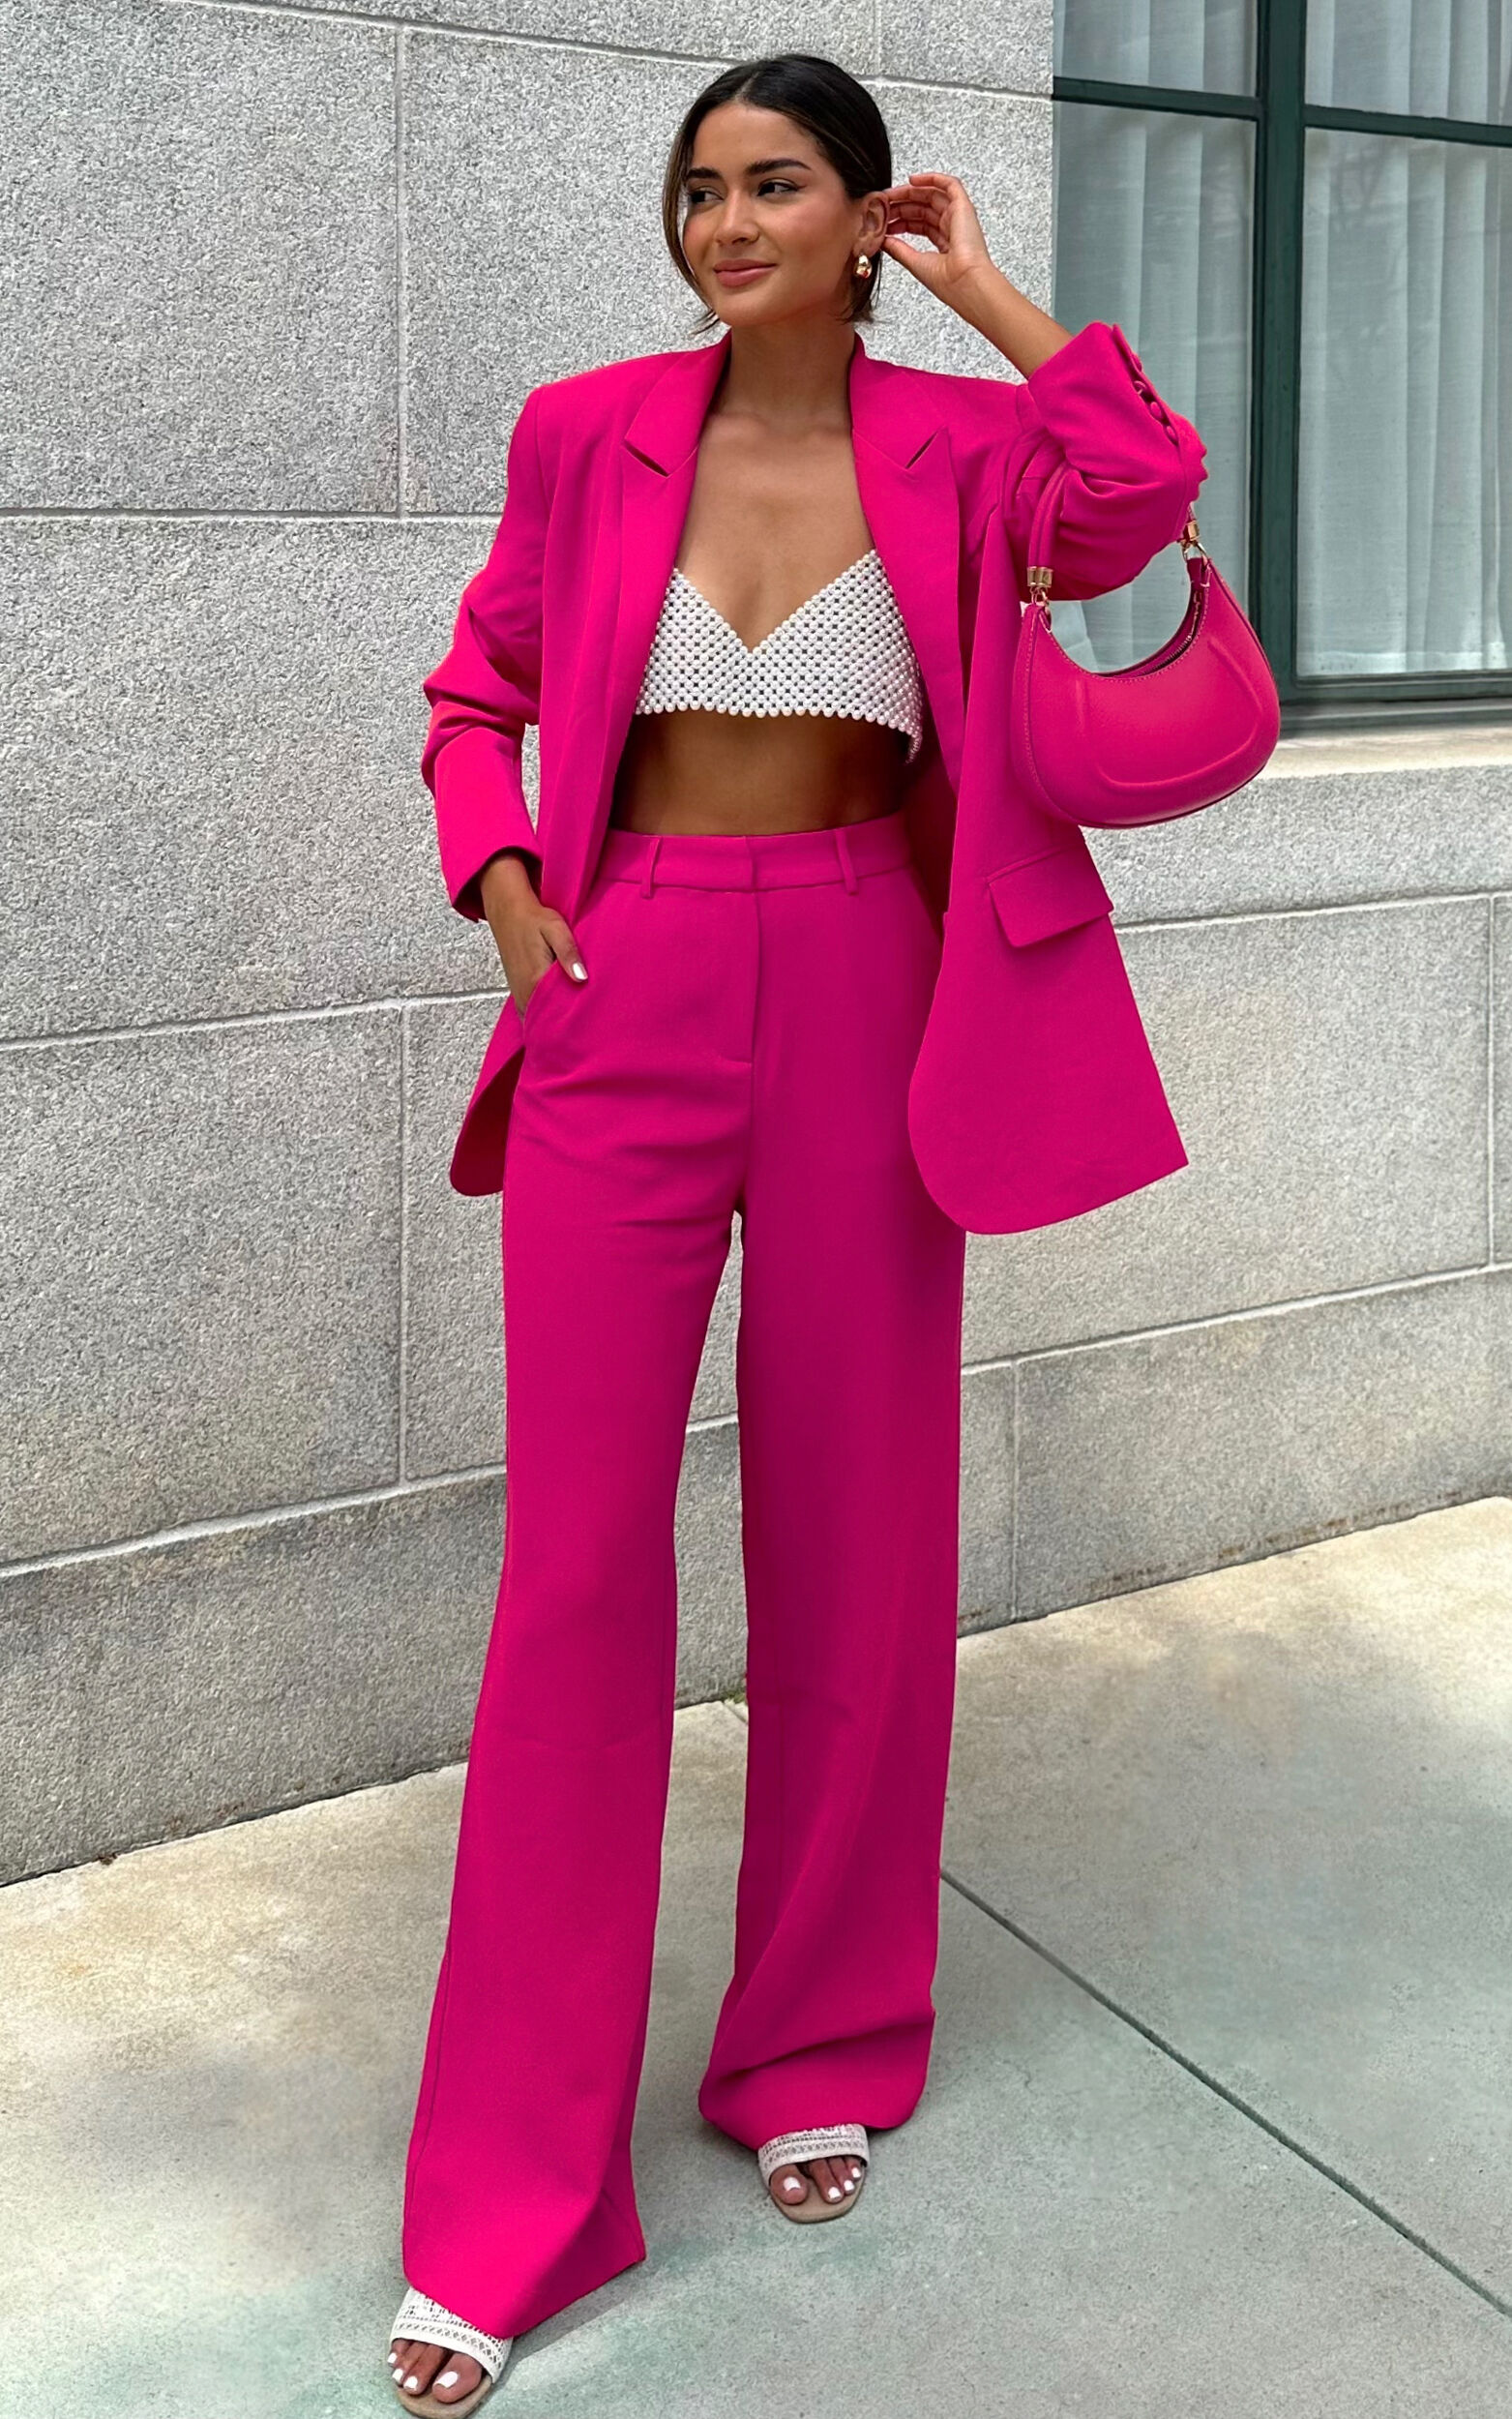 Bonnie Pants - High Waisted Tailored Wide Leg Pants in Pink - 04, PNK1